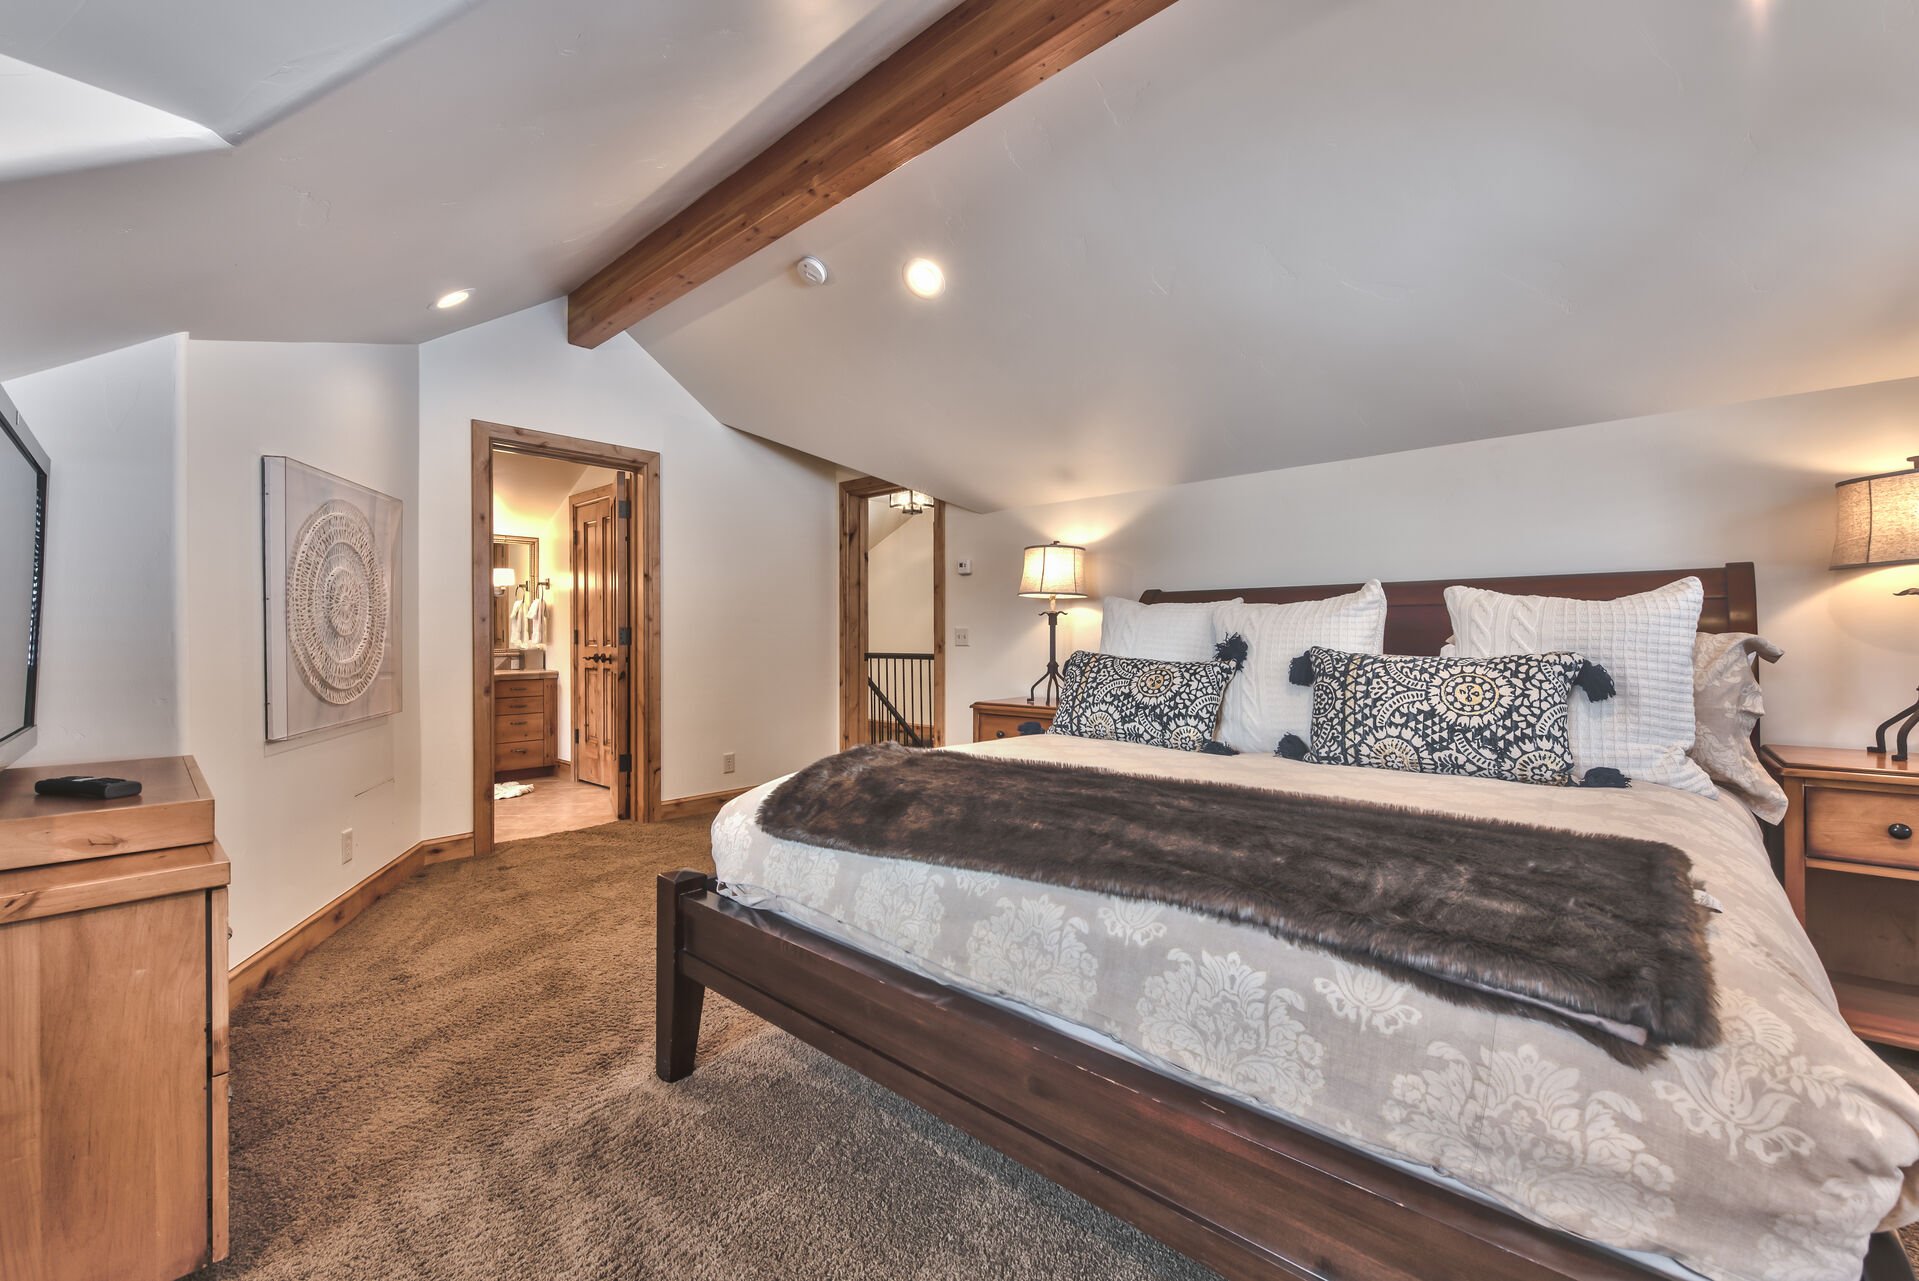 Level 4 Grand Master Bedroom with King Bed + Daybed (sleeps 3), 50